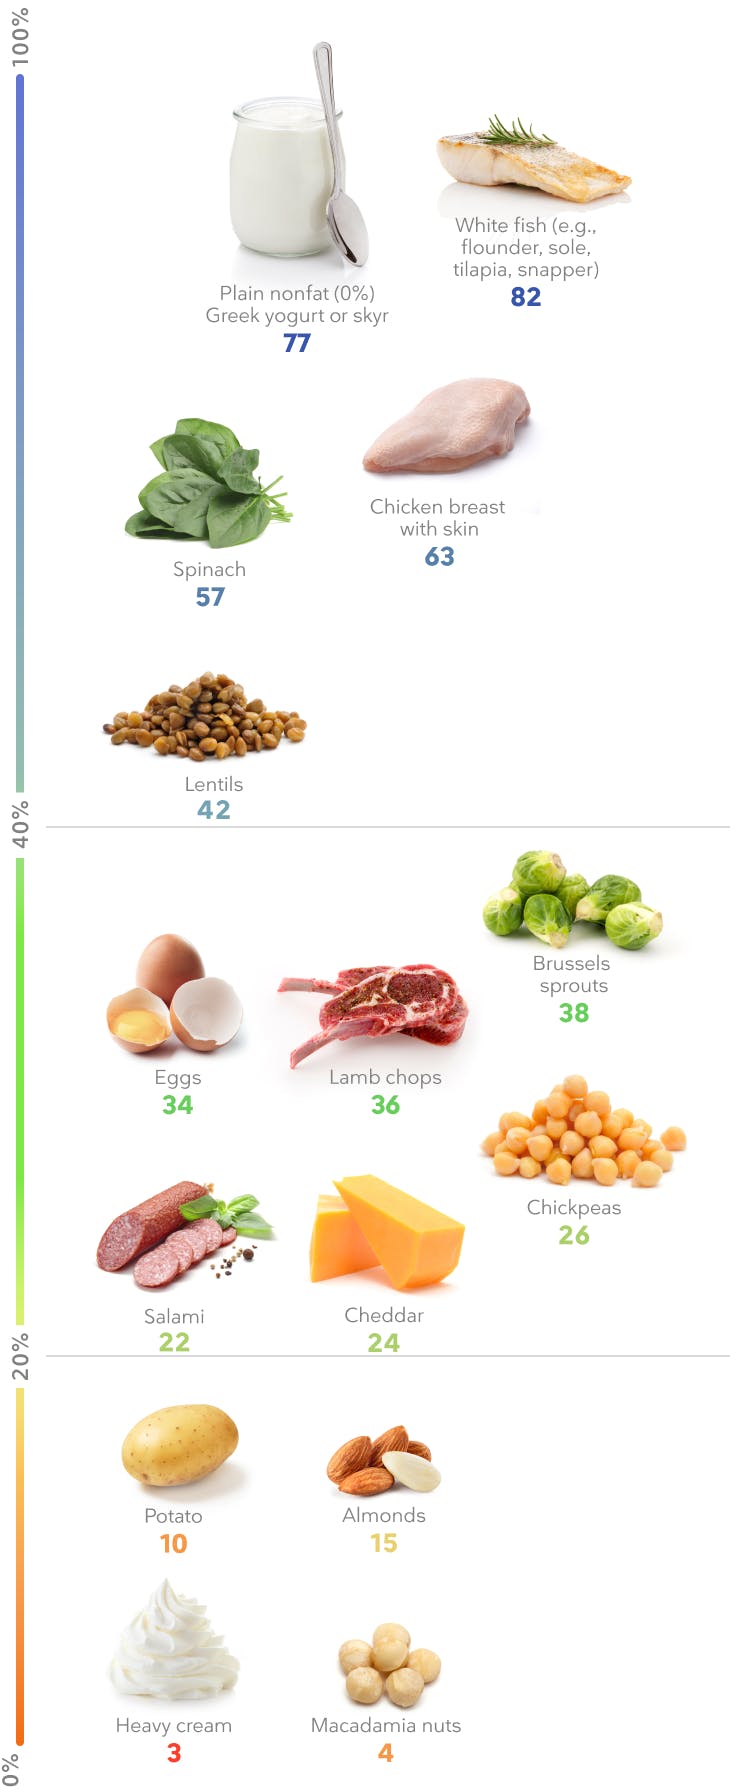 high-protein foods for weight loss_mobile